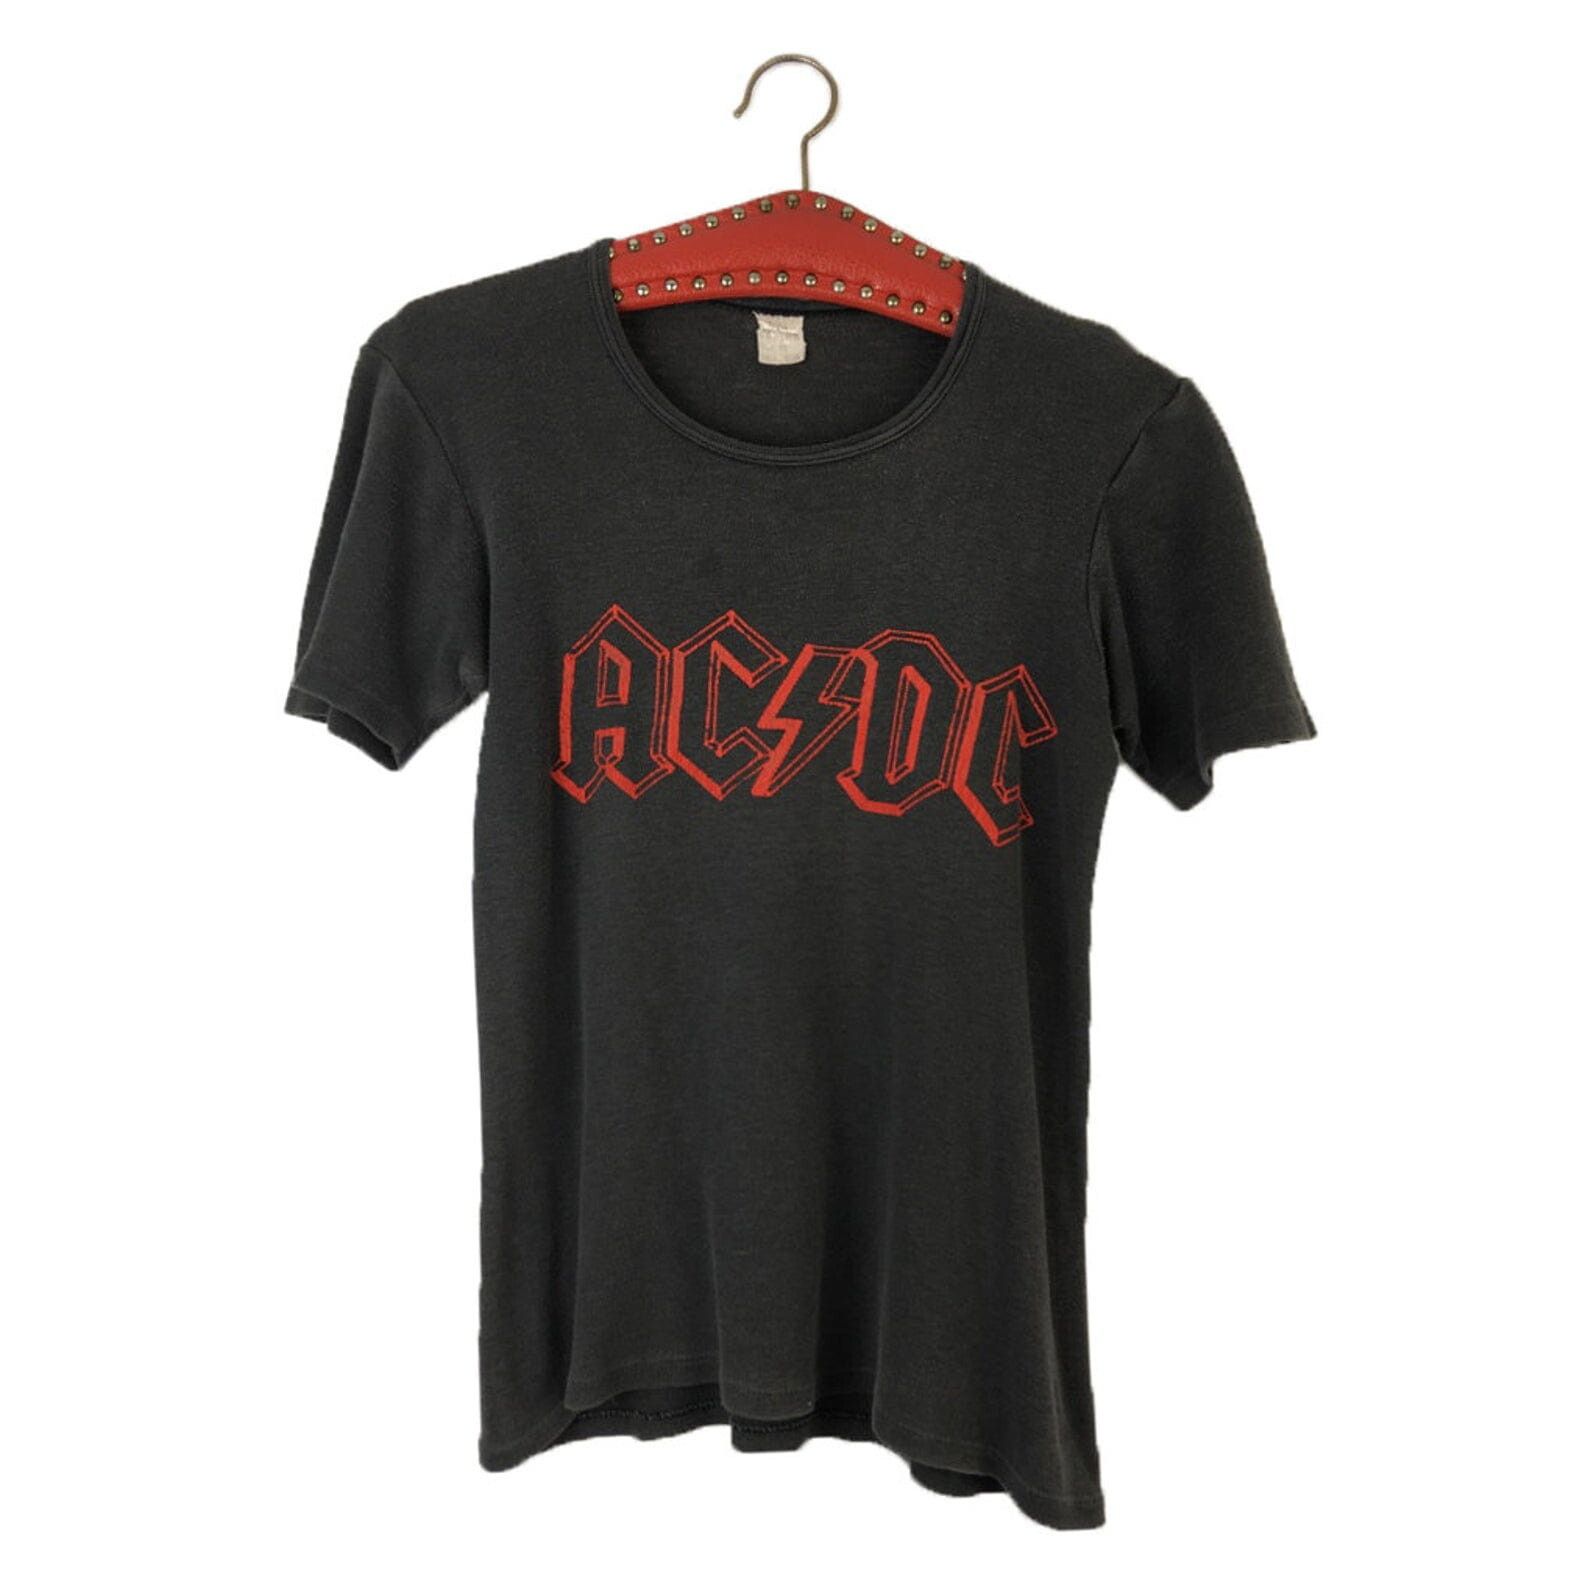 Vintage Official 1979 European AC DC Highway to Hell tour t-shirt Size US S / EU 44-46 / 1 - 1 Preview